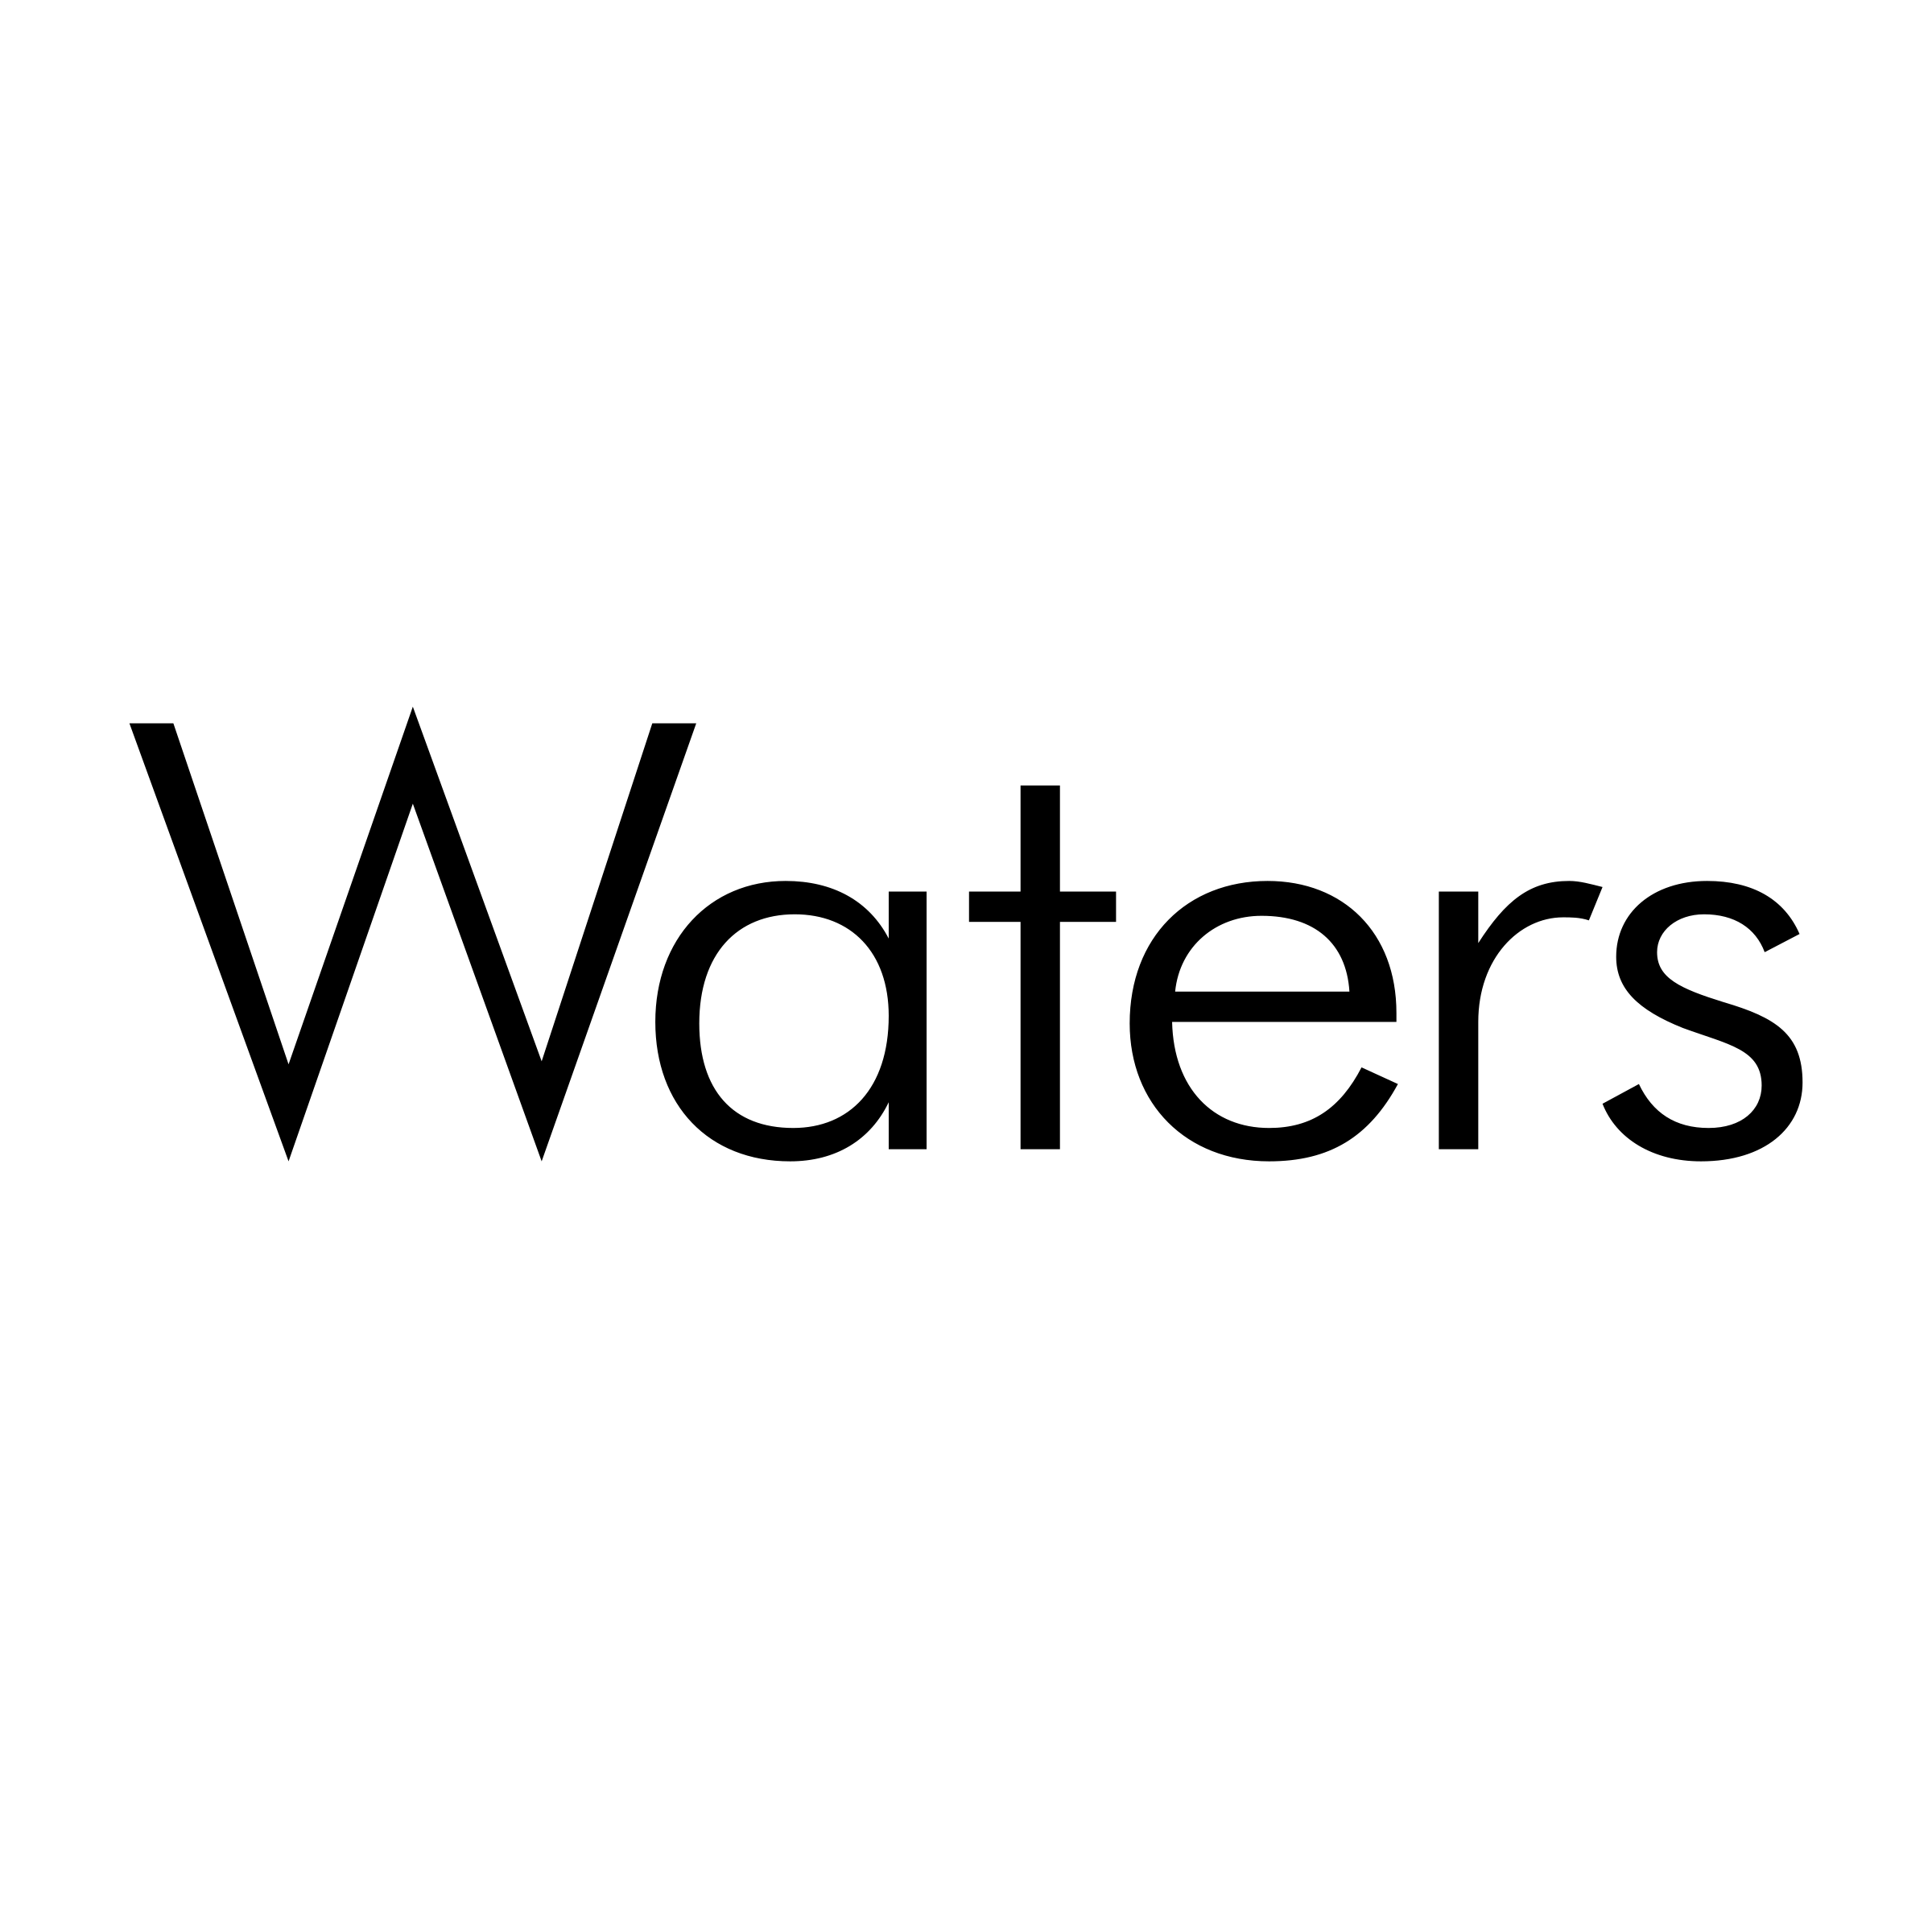 Waters Logo - Waters Logo PNG Transparent & SVG Vector - Freebie Supply